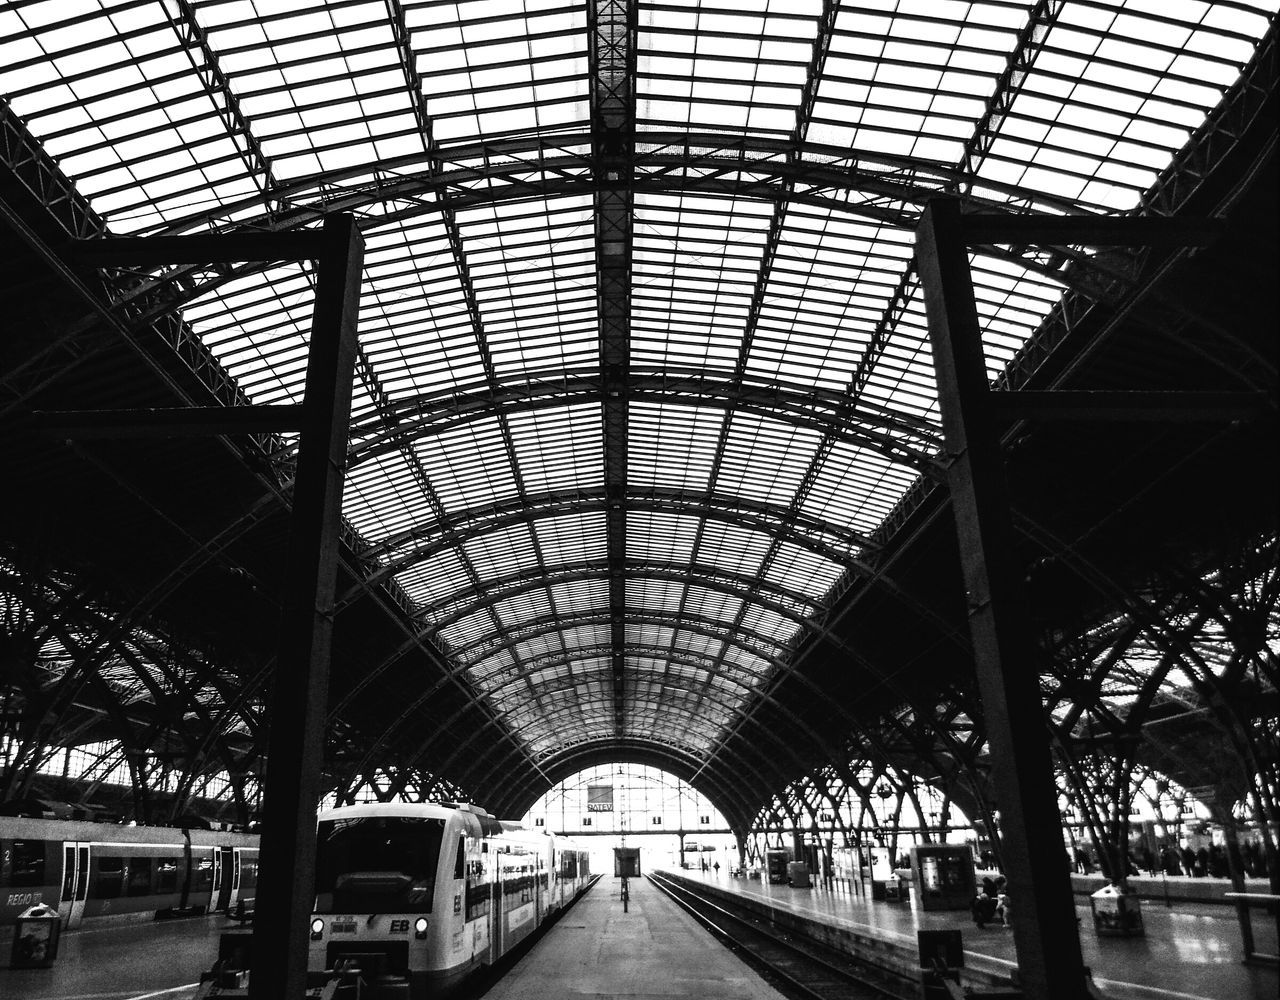 indoors, ceiling, architecture, transportation, built structure, railroad station, public transportation, rail transportation, the way forward, railroad station platform, diminishing perspective, interior, incidental people, transportation building - type of building, railroad track, travel, vanishing point, empty, illuminated, arch